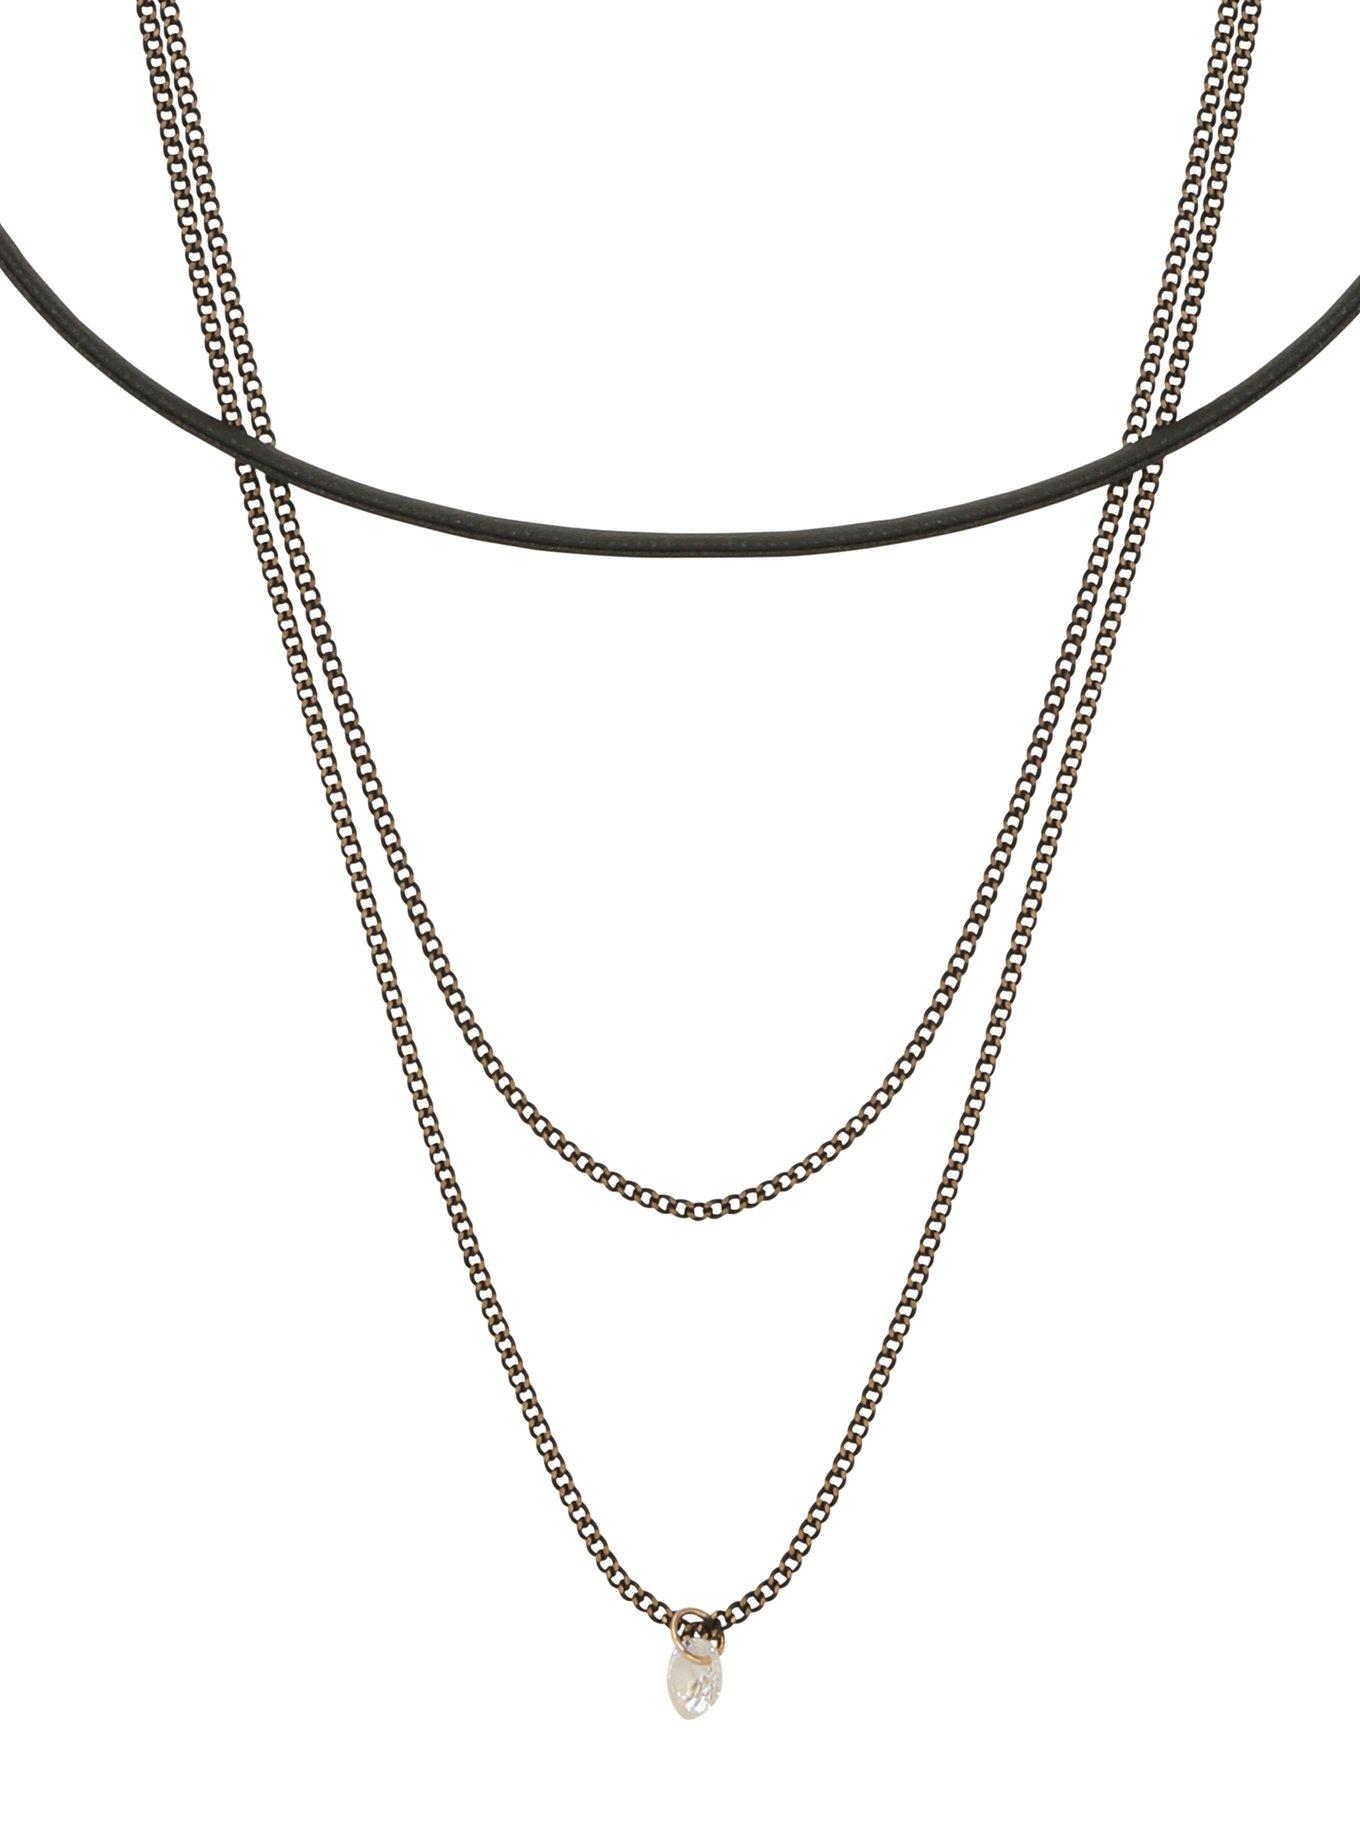 Blackheart Gold & Black Stacked Chain & Choker Necklace, , hi-res